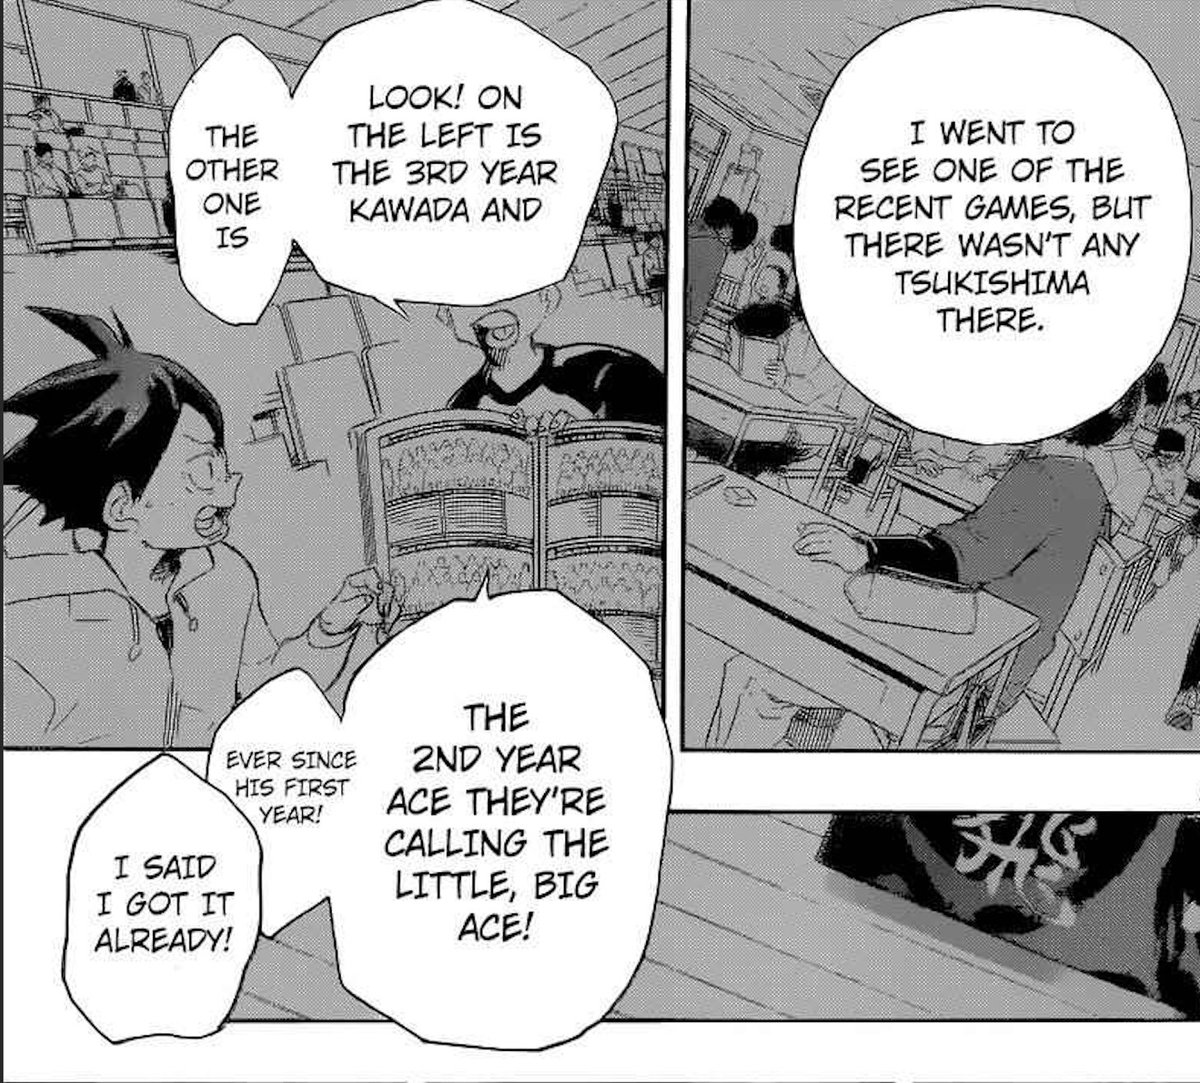 of course, udai is unaware of his effect on these players but i think it's a necessary connection between the three of them. by paralleling their experiences during the kamomedai match, we can clearly see how deeply this moved both tsukishima and hinata.